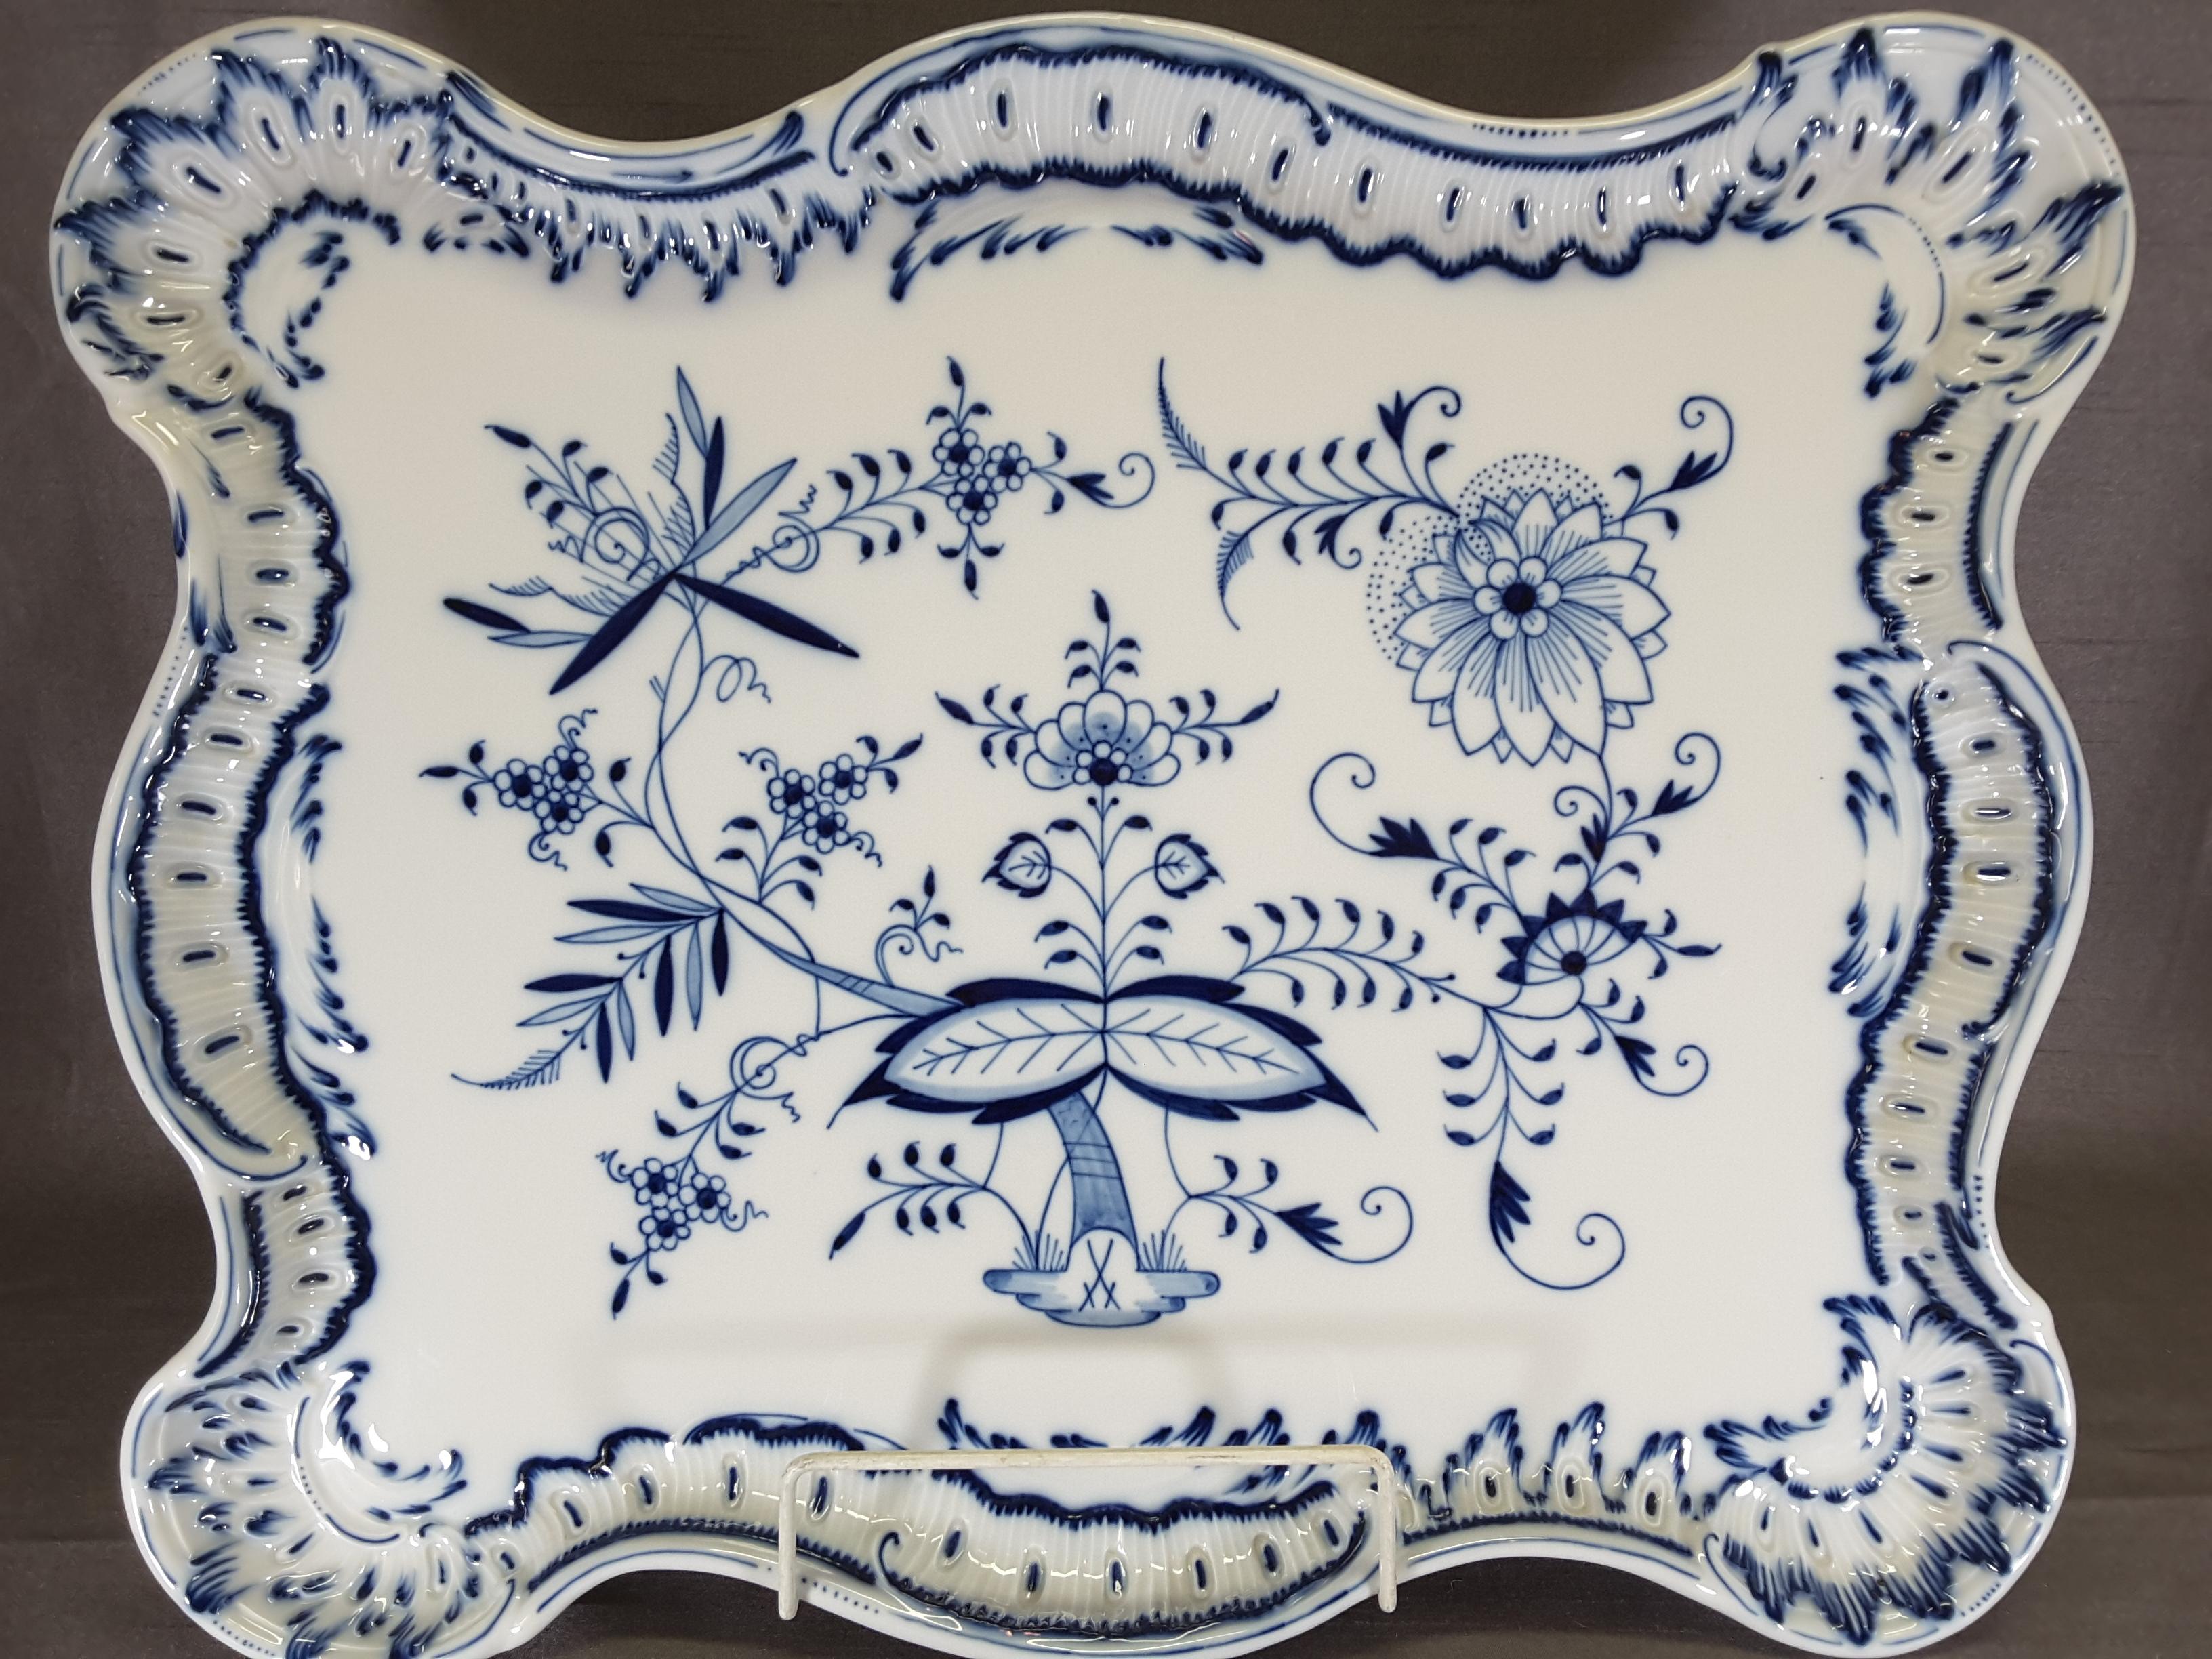 Large Meissen blue onion scalloped edge platter, decorative border, in a stunning blue, in a larger size that makes a statement.

The platter measures 18 1/4